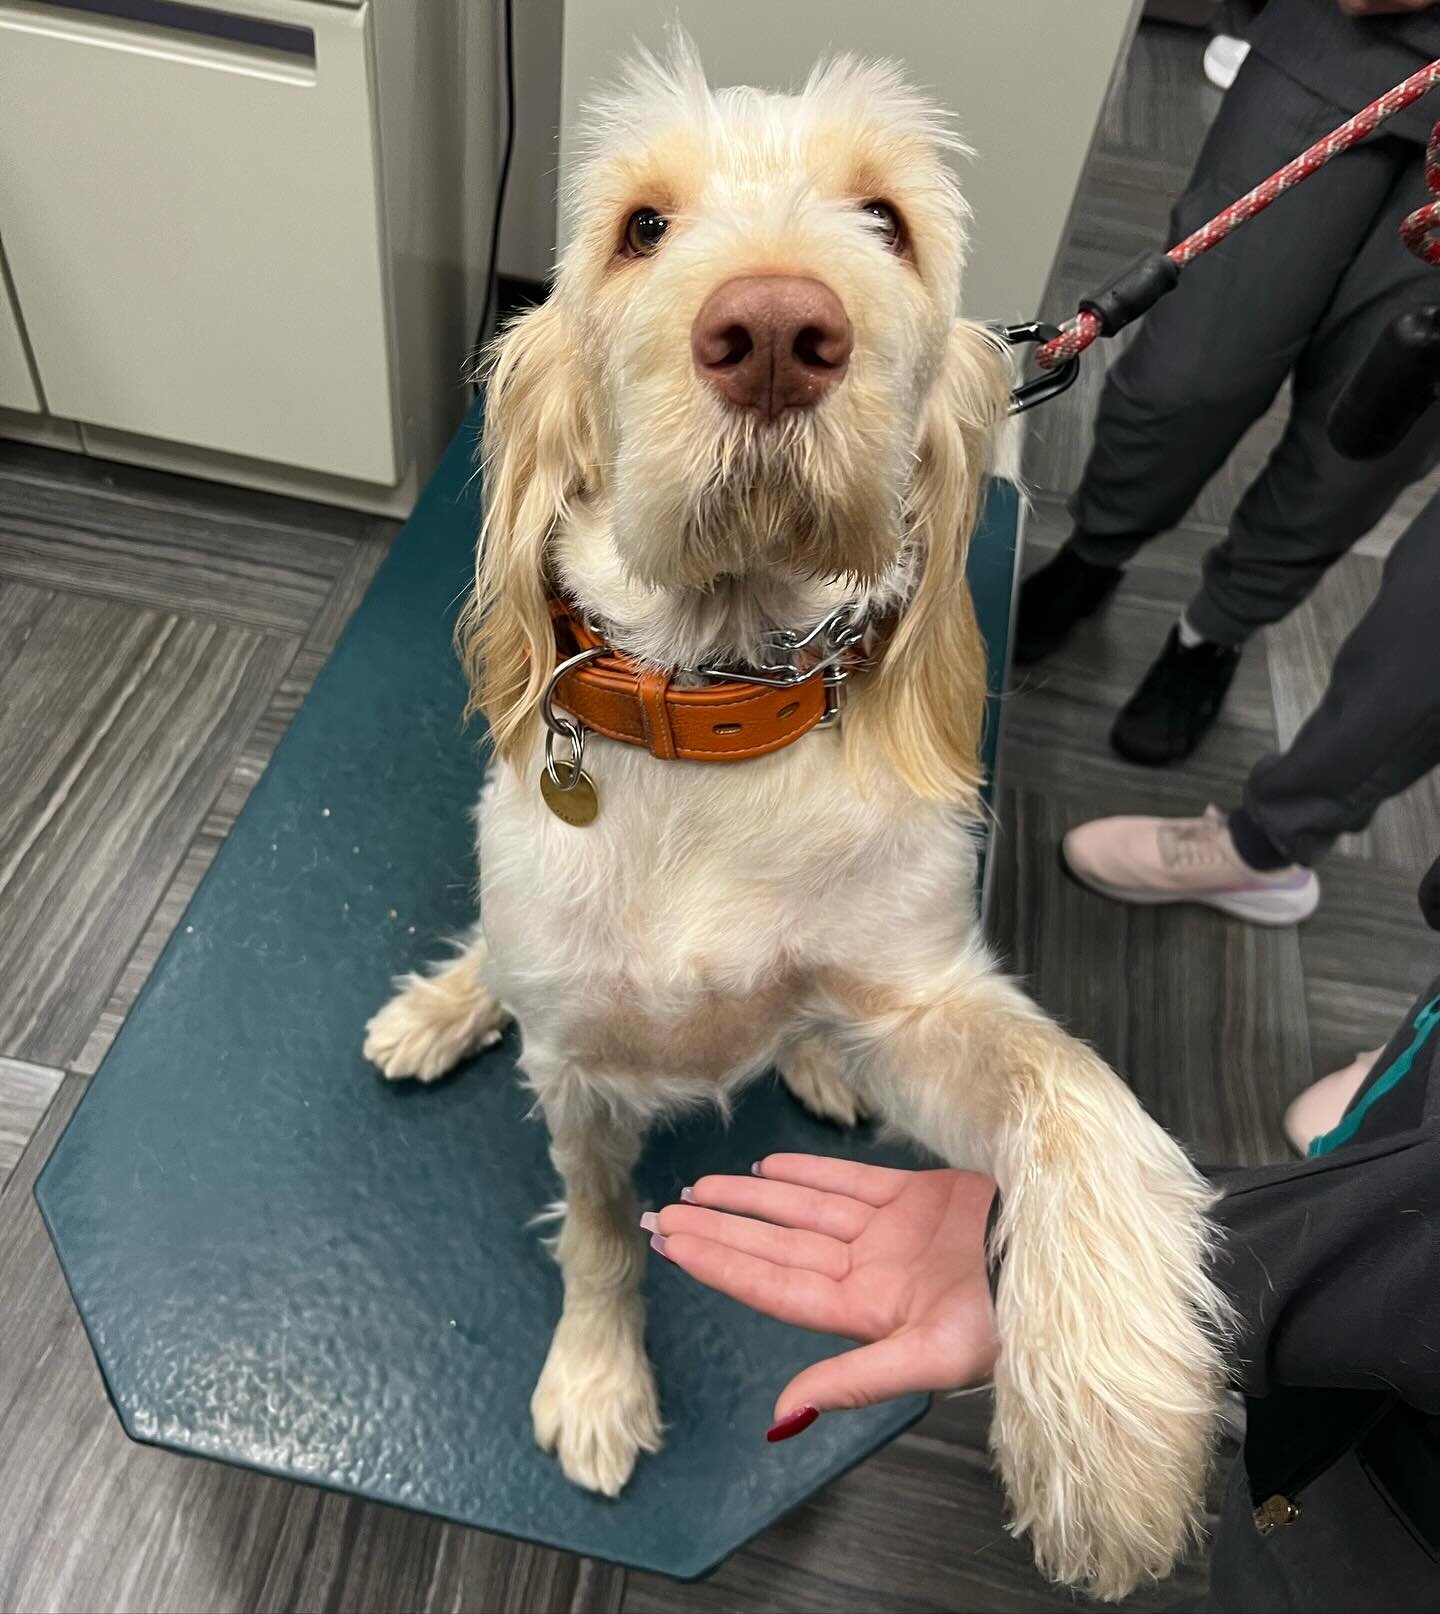 This gorgeous creature is Simona, a 2yo Spinone Italiano owned by Dr. Meleleo @ppah_south.

Simona suffered from chronic lip fold dermatitis that did not resolve with various topical treatments &amp; antibiotics.

Dr. Kahn performed a bilateral cheli